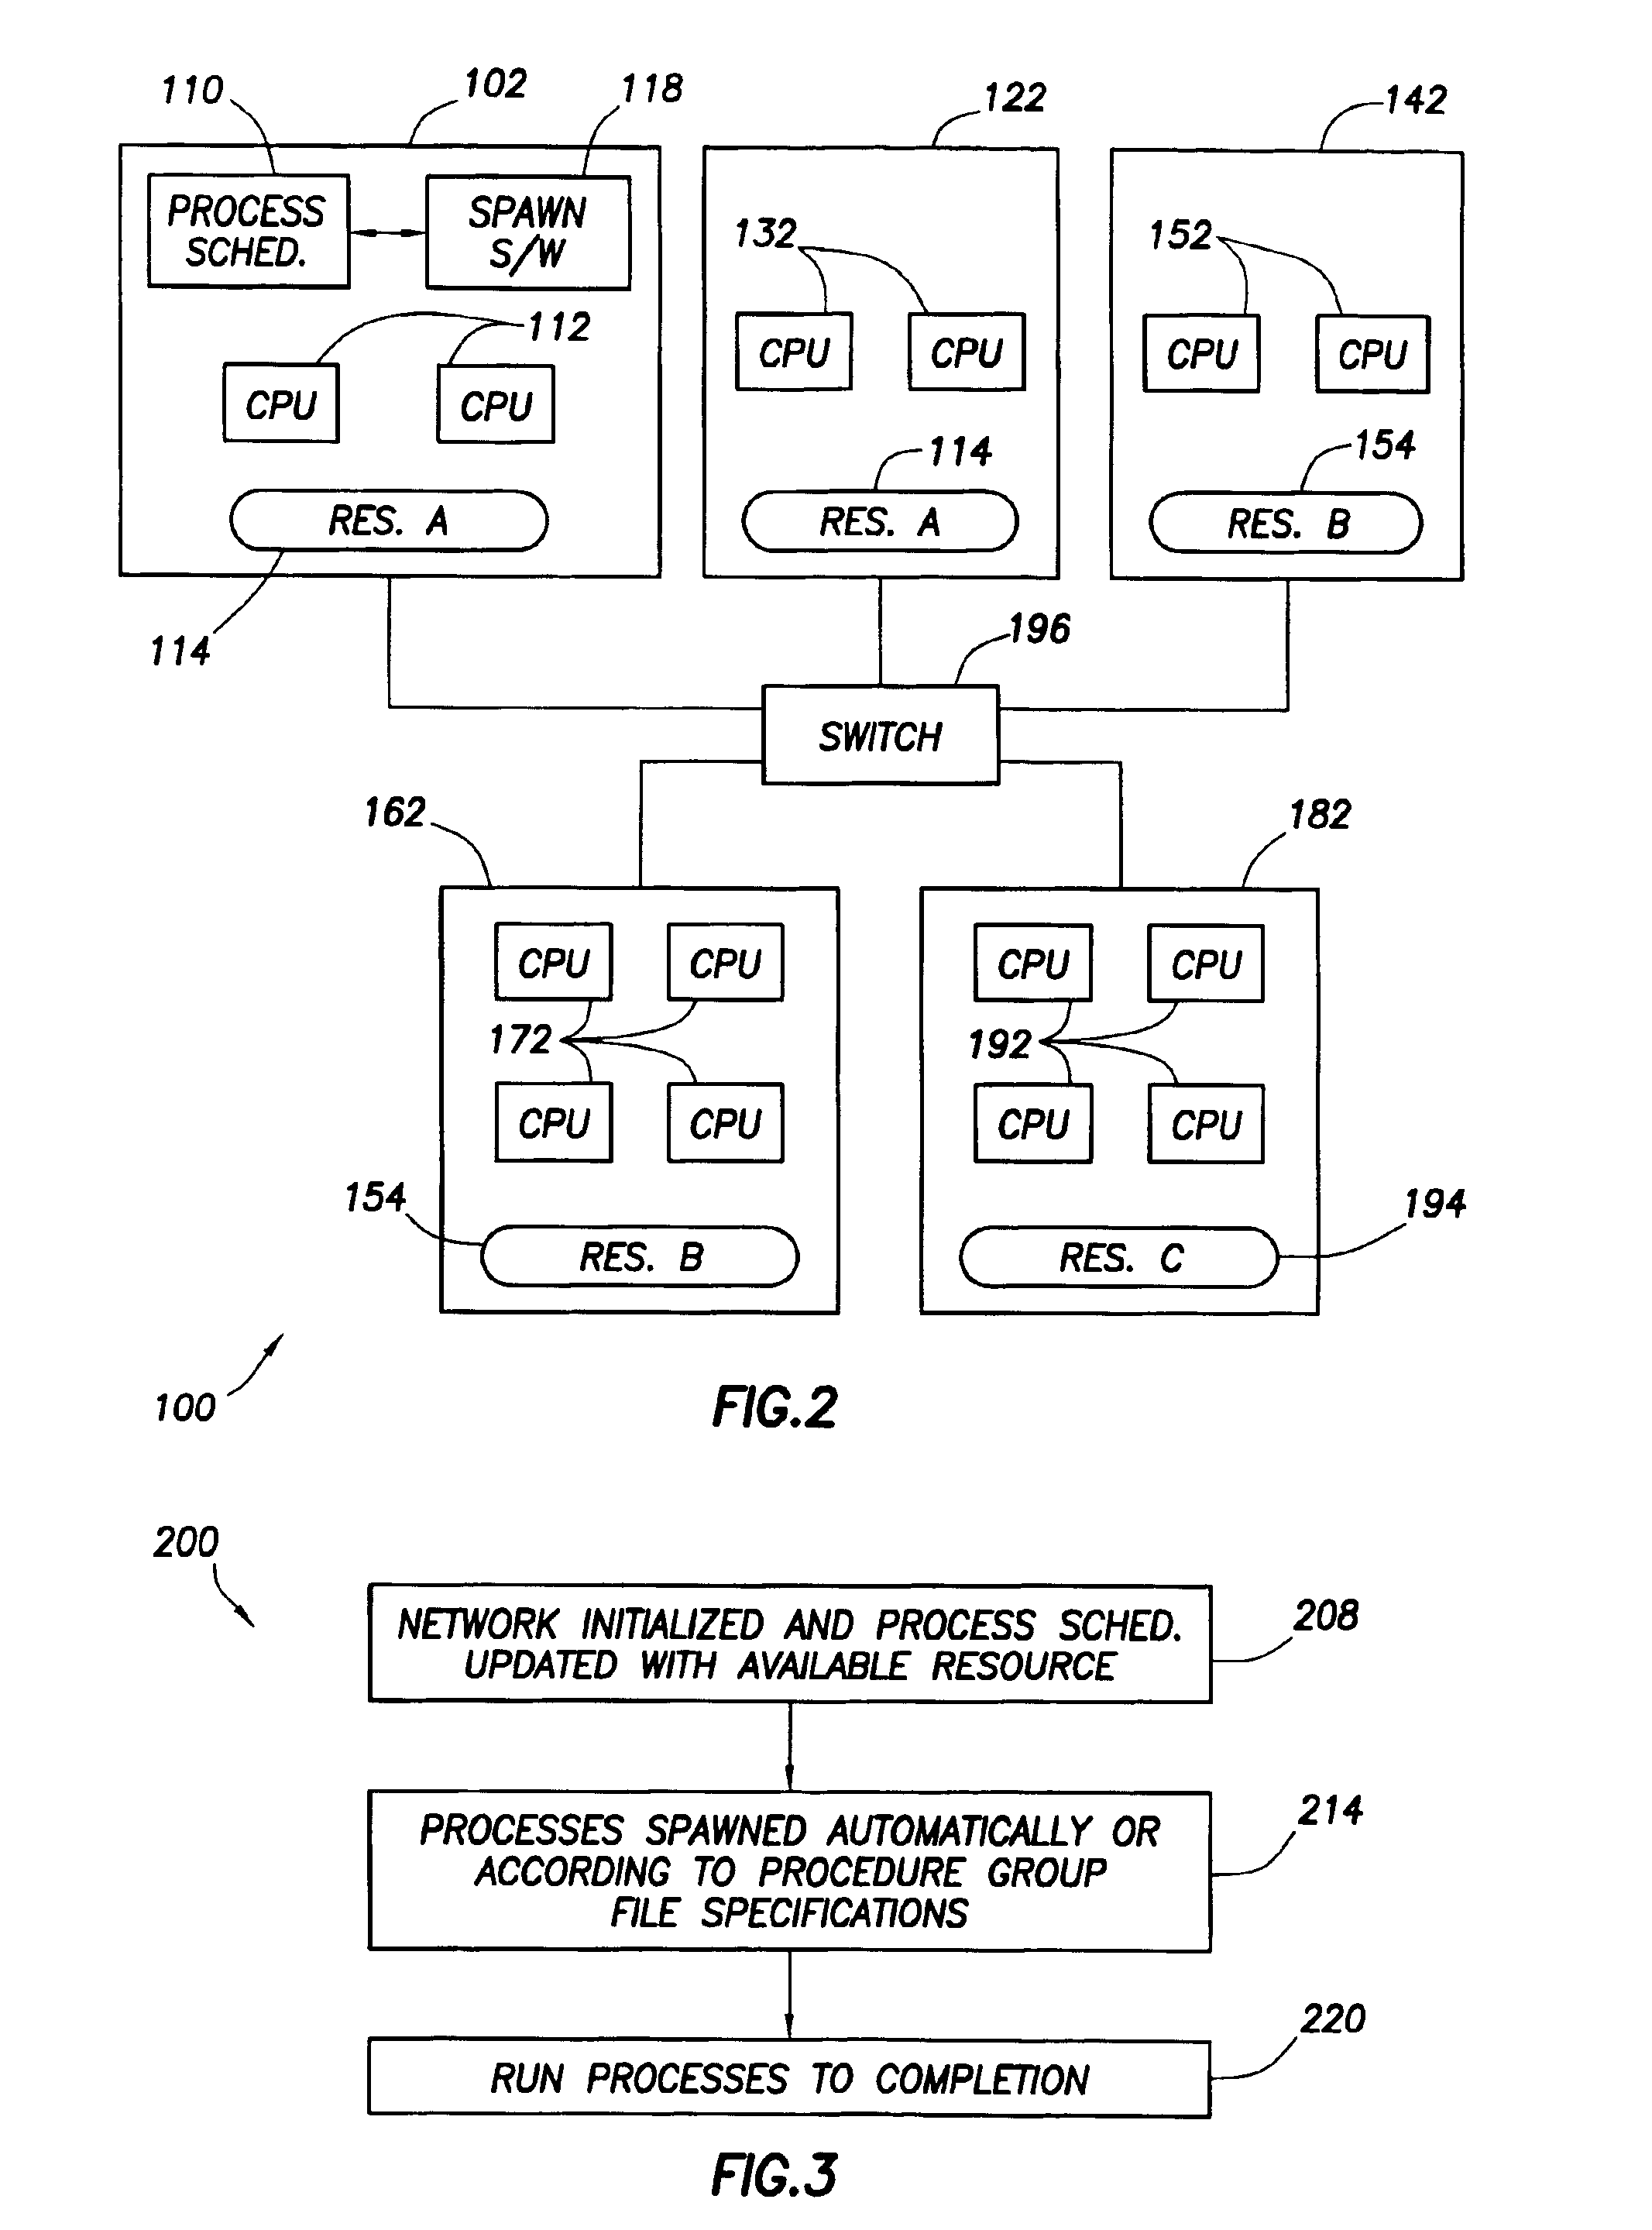 Distributed computer network which spawns inter-node parallel processes based on resource availability